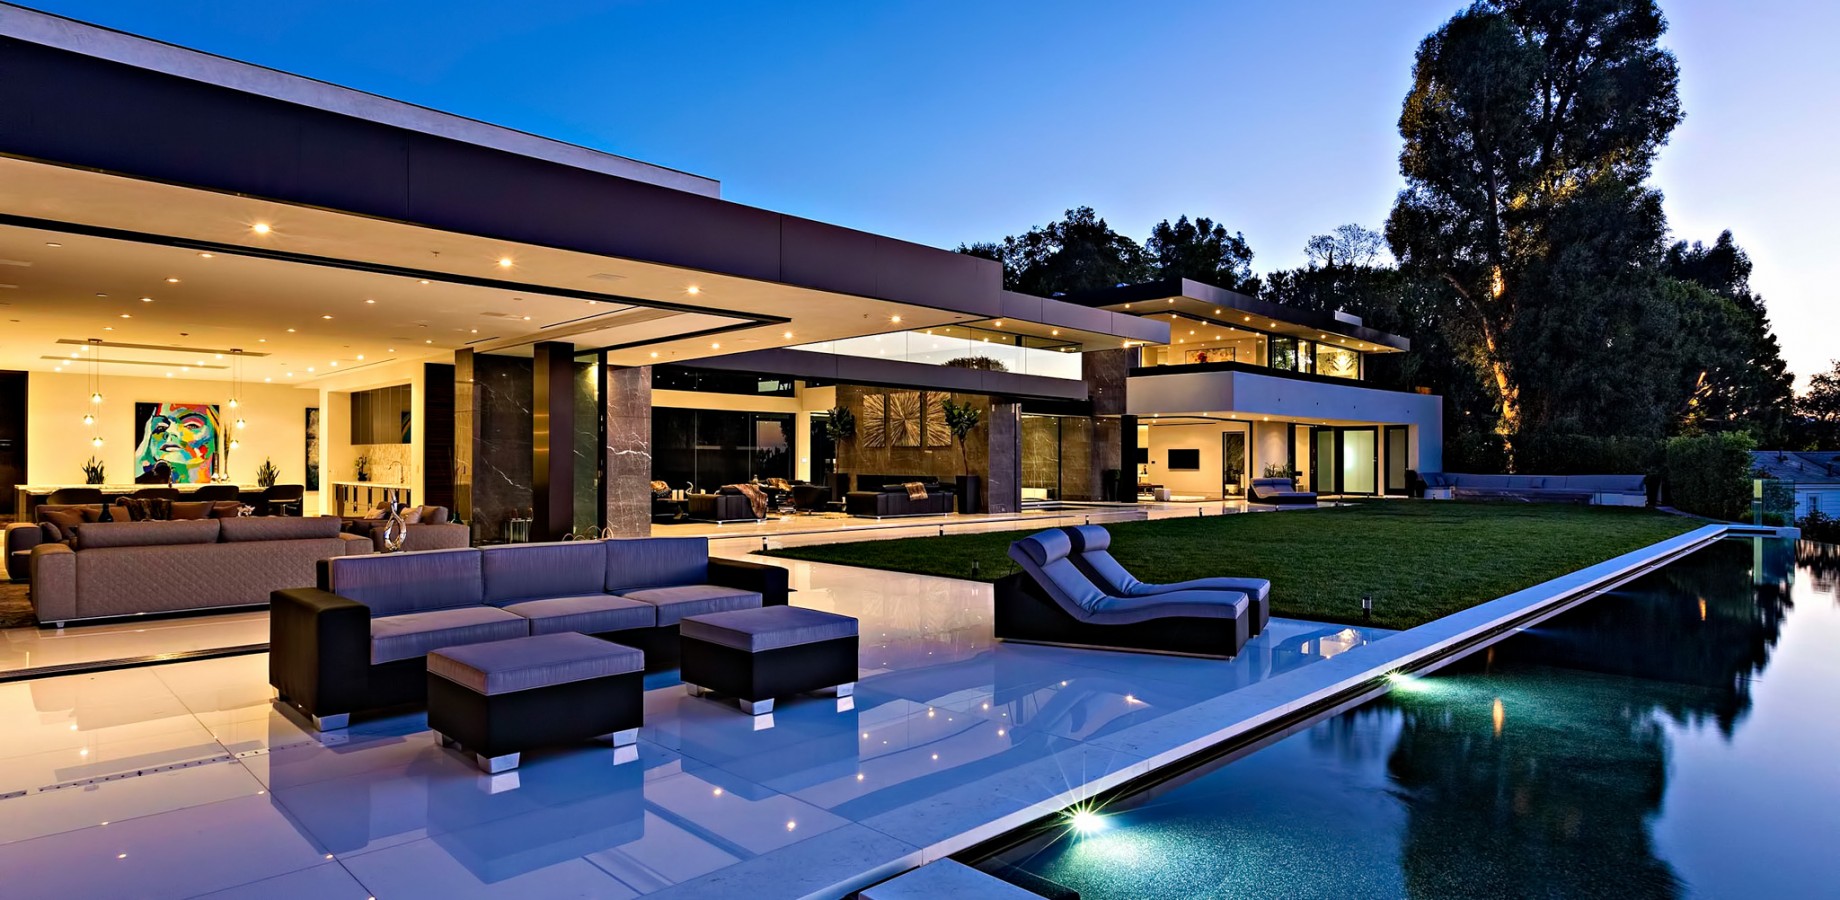 Timeless Contemporary Luxury Homes with Glamorous Interior Elements  Ideas 4 Homes